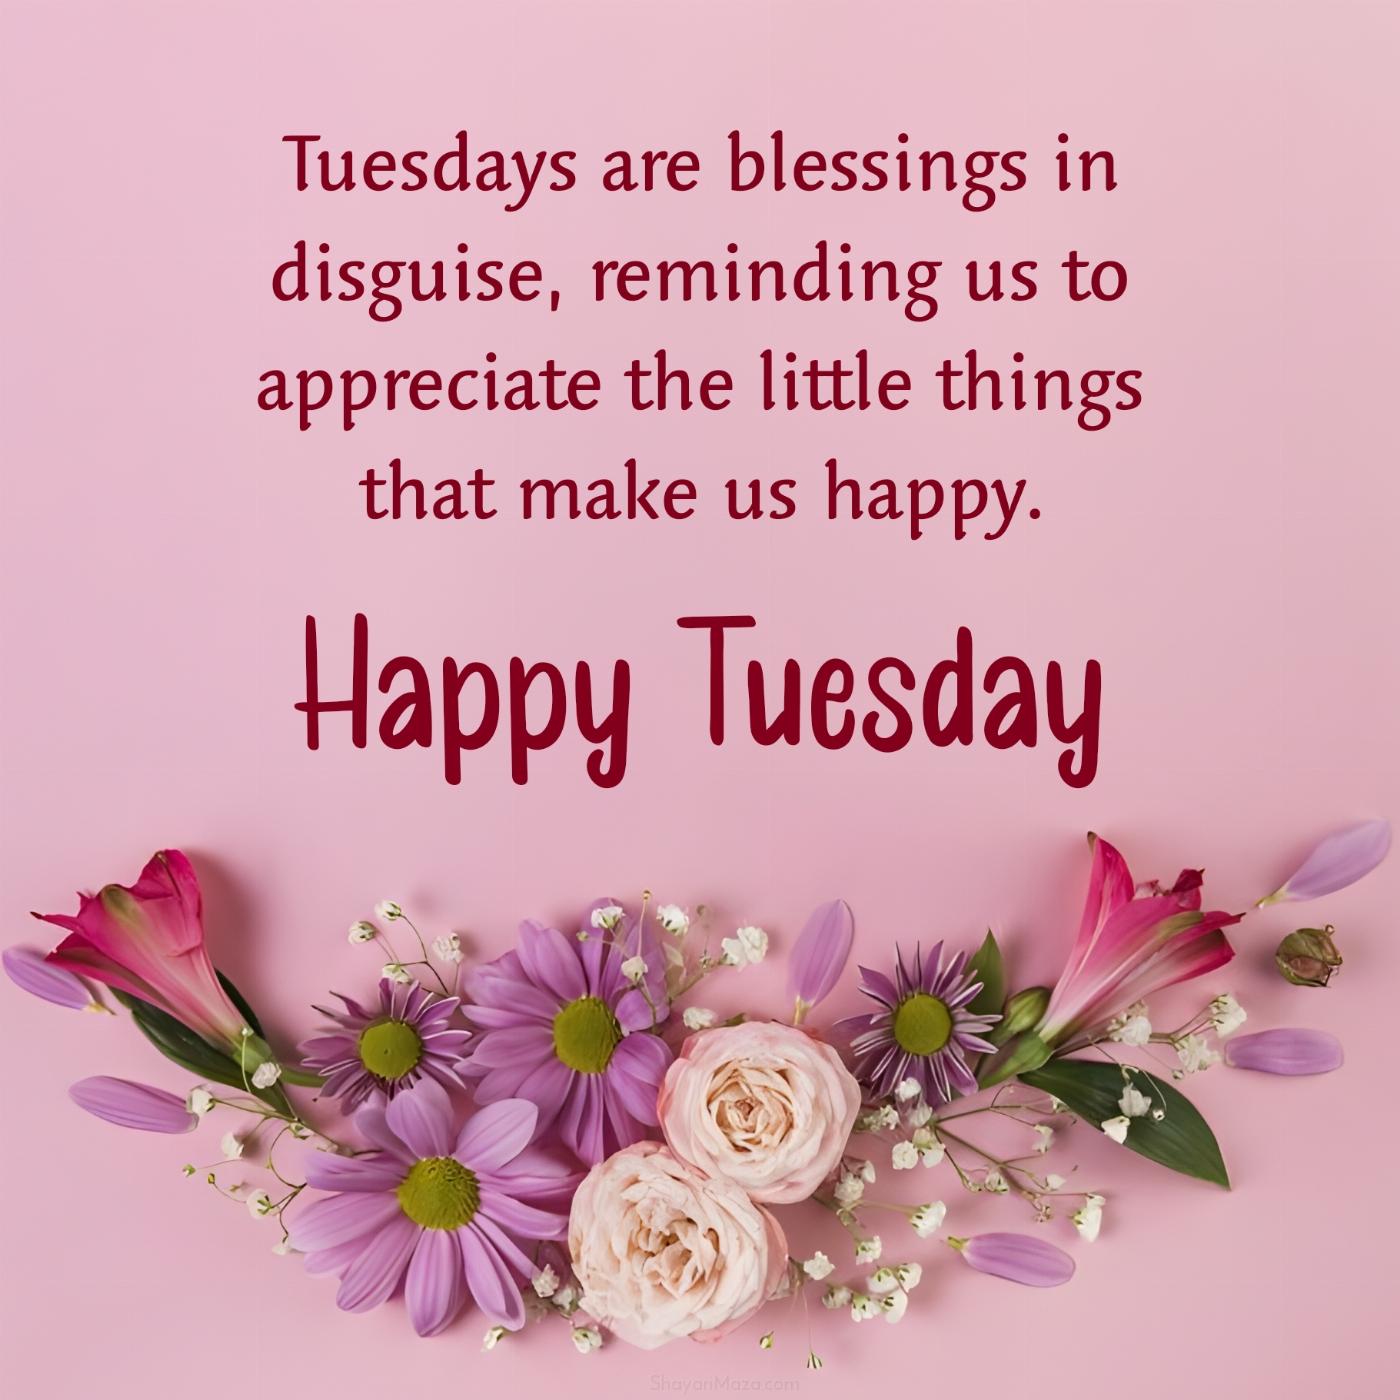 Tuesdays are blessings in disguise reminding us to appreciate